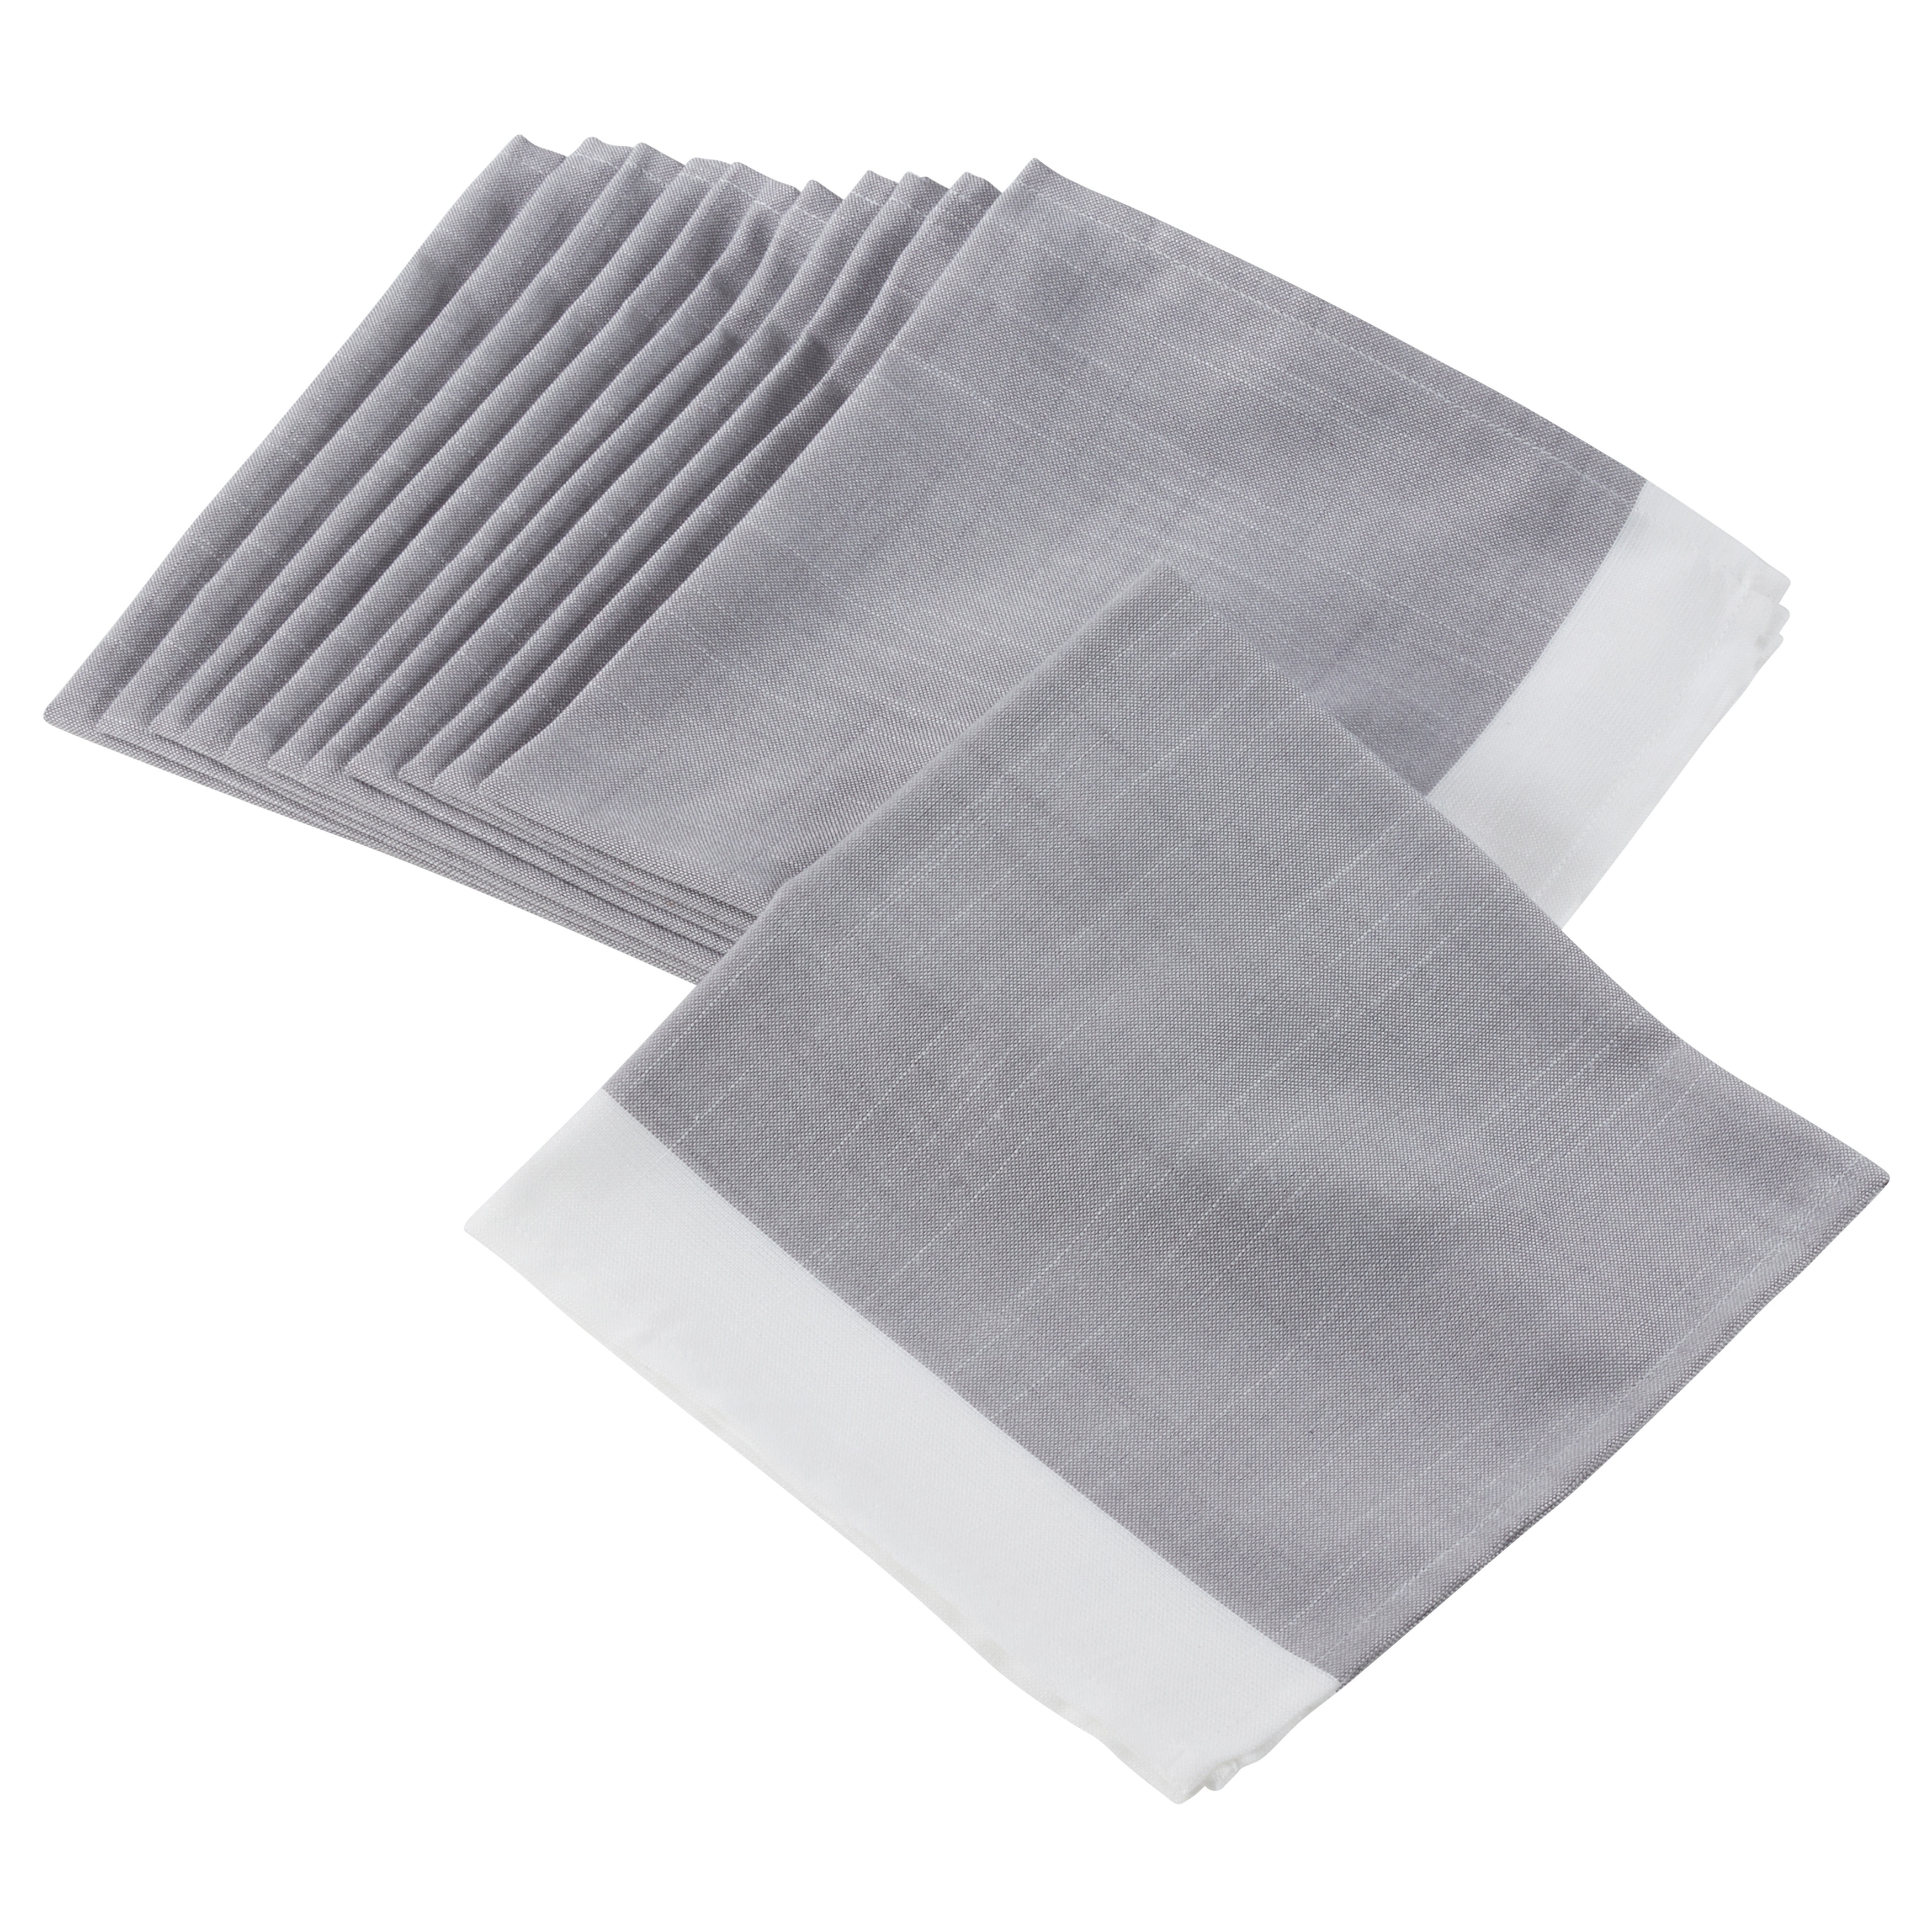 https://ak1.ostkcdn.com/images/products/22888753/Banded-Border-Dinner-Napkins-Set-of-12-587c91ca-f328-469c-a17f-6c7b63cc9593.jpg